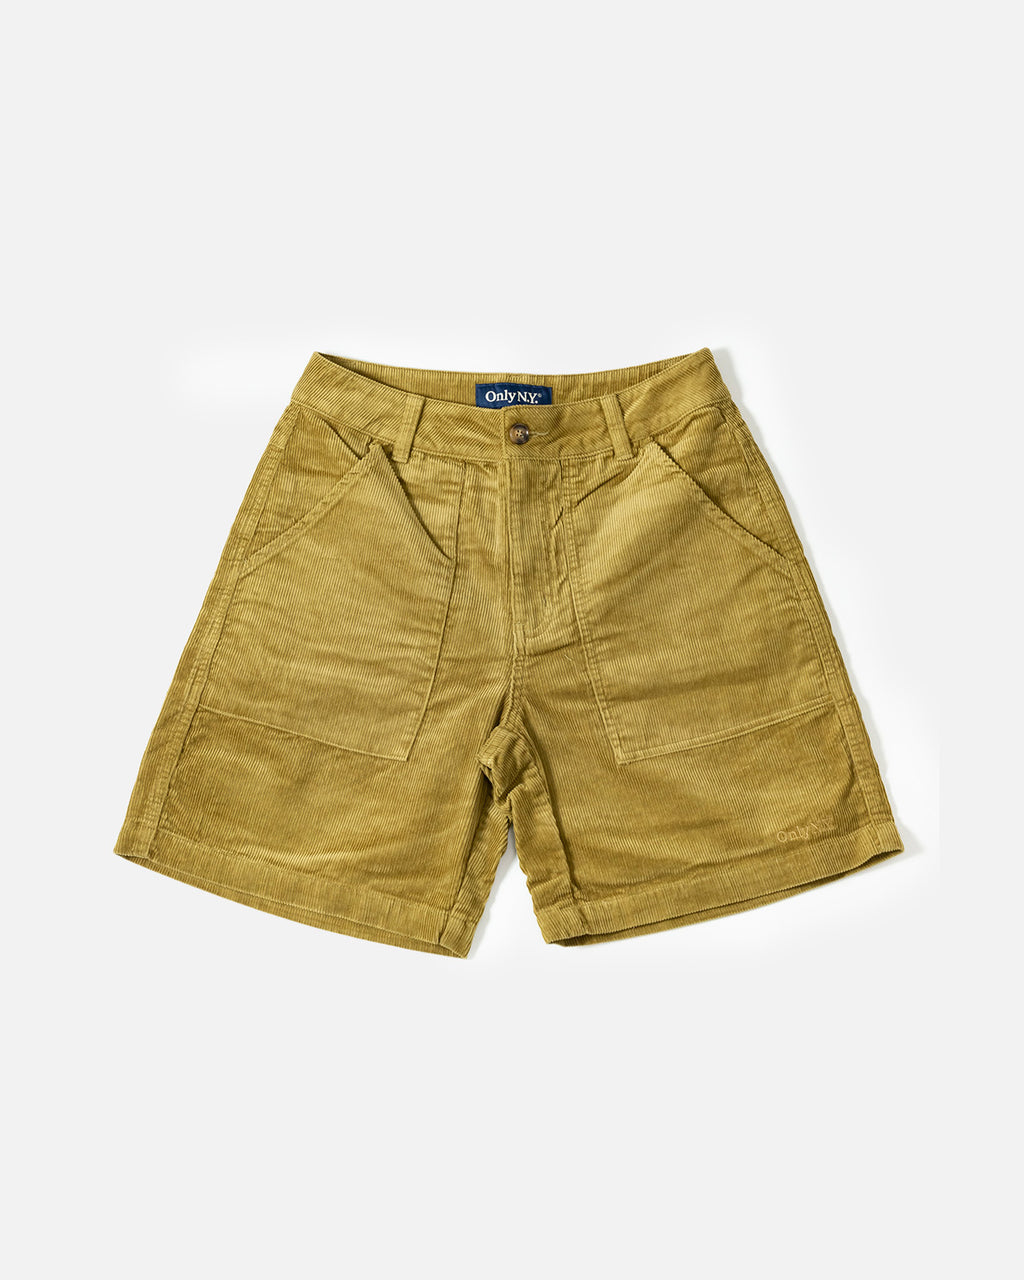 Only NY / Corduroy Fatigue Shorts コーデュロイ